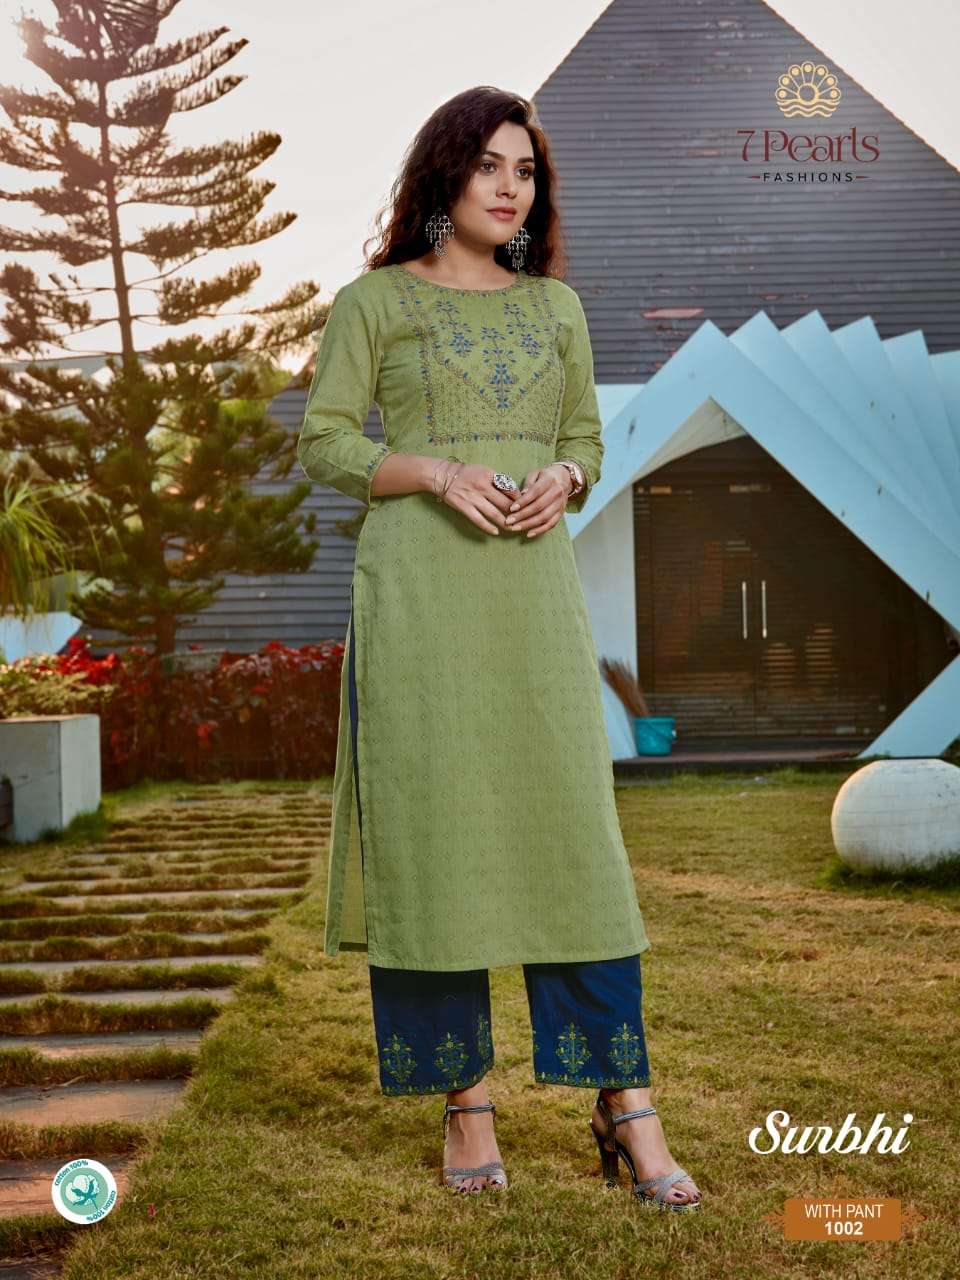 SURBHI BY 7 PEARLS 1001 TO 1004 SERIES BEAUTIFUL STYLISH FANCY COLORFUL CASUAL WEAR & ETHNIC WEAR & READY TO WEAR HEAVY PURE COTTTON EMBROIDERED KURTIS WITH BOTTOM AT WHOLESALE PRICE